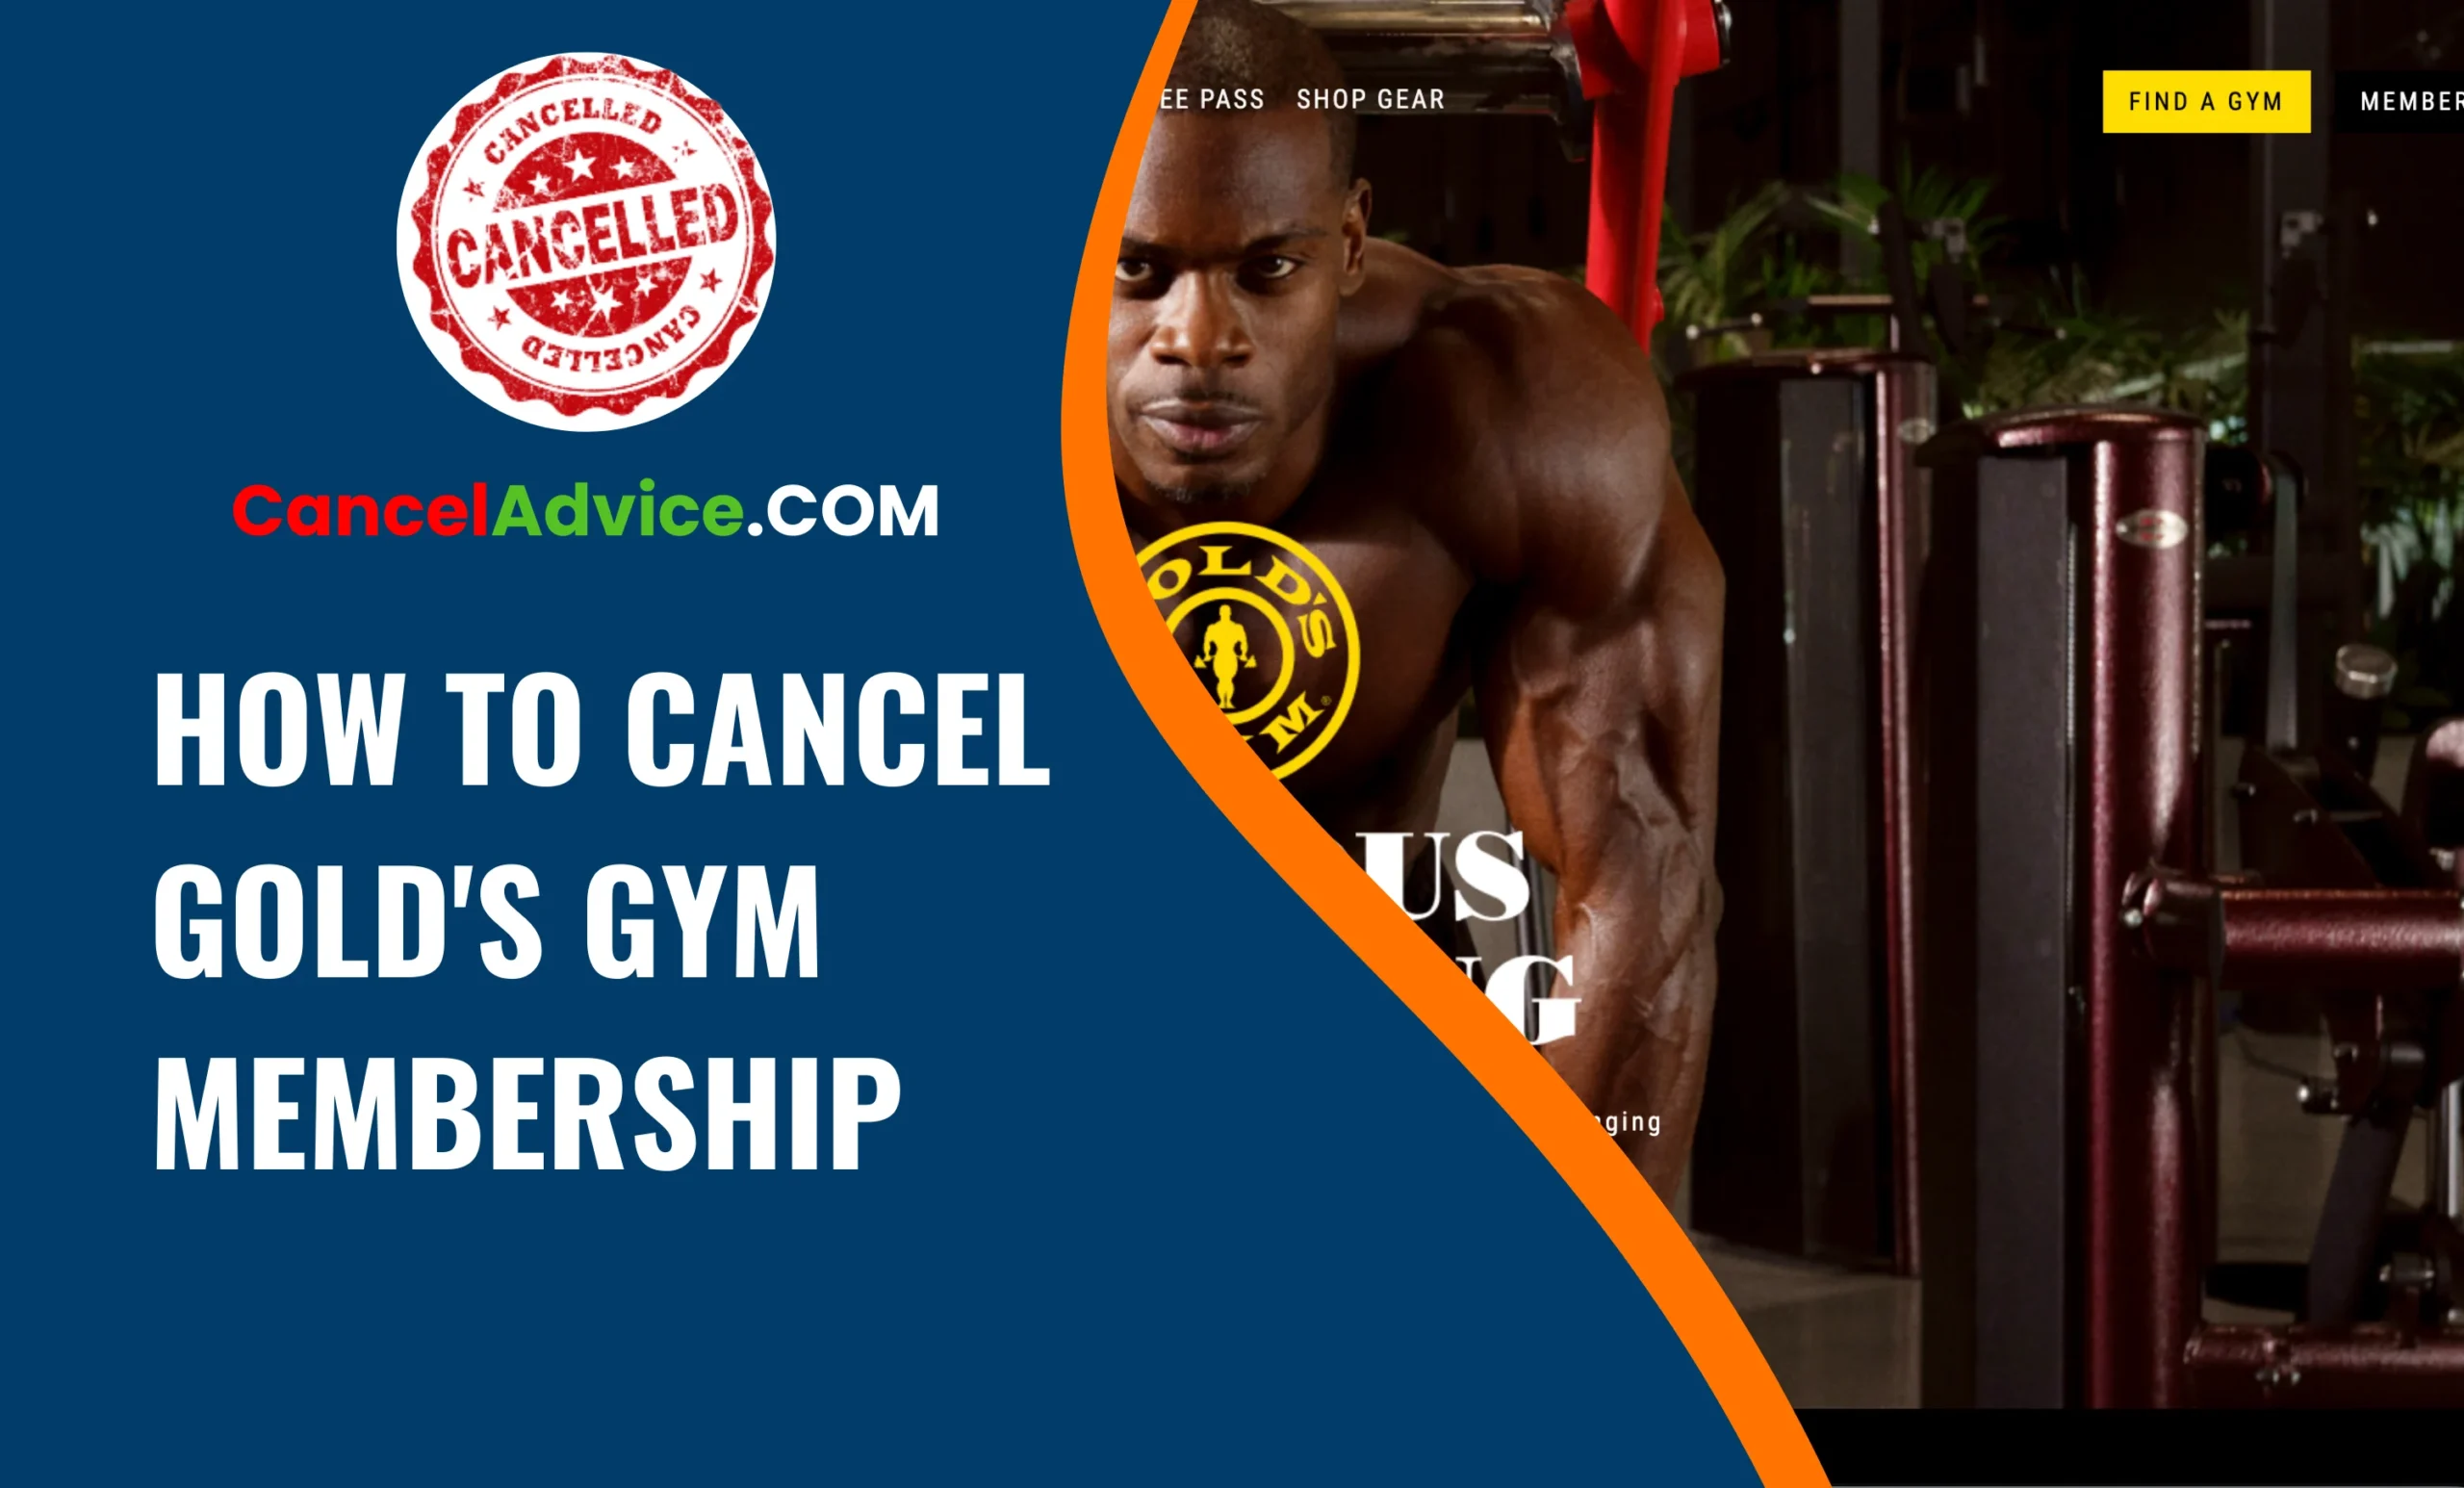 How To Cancel Gold's Gym Membership